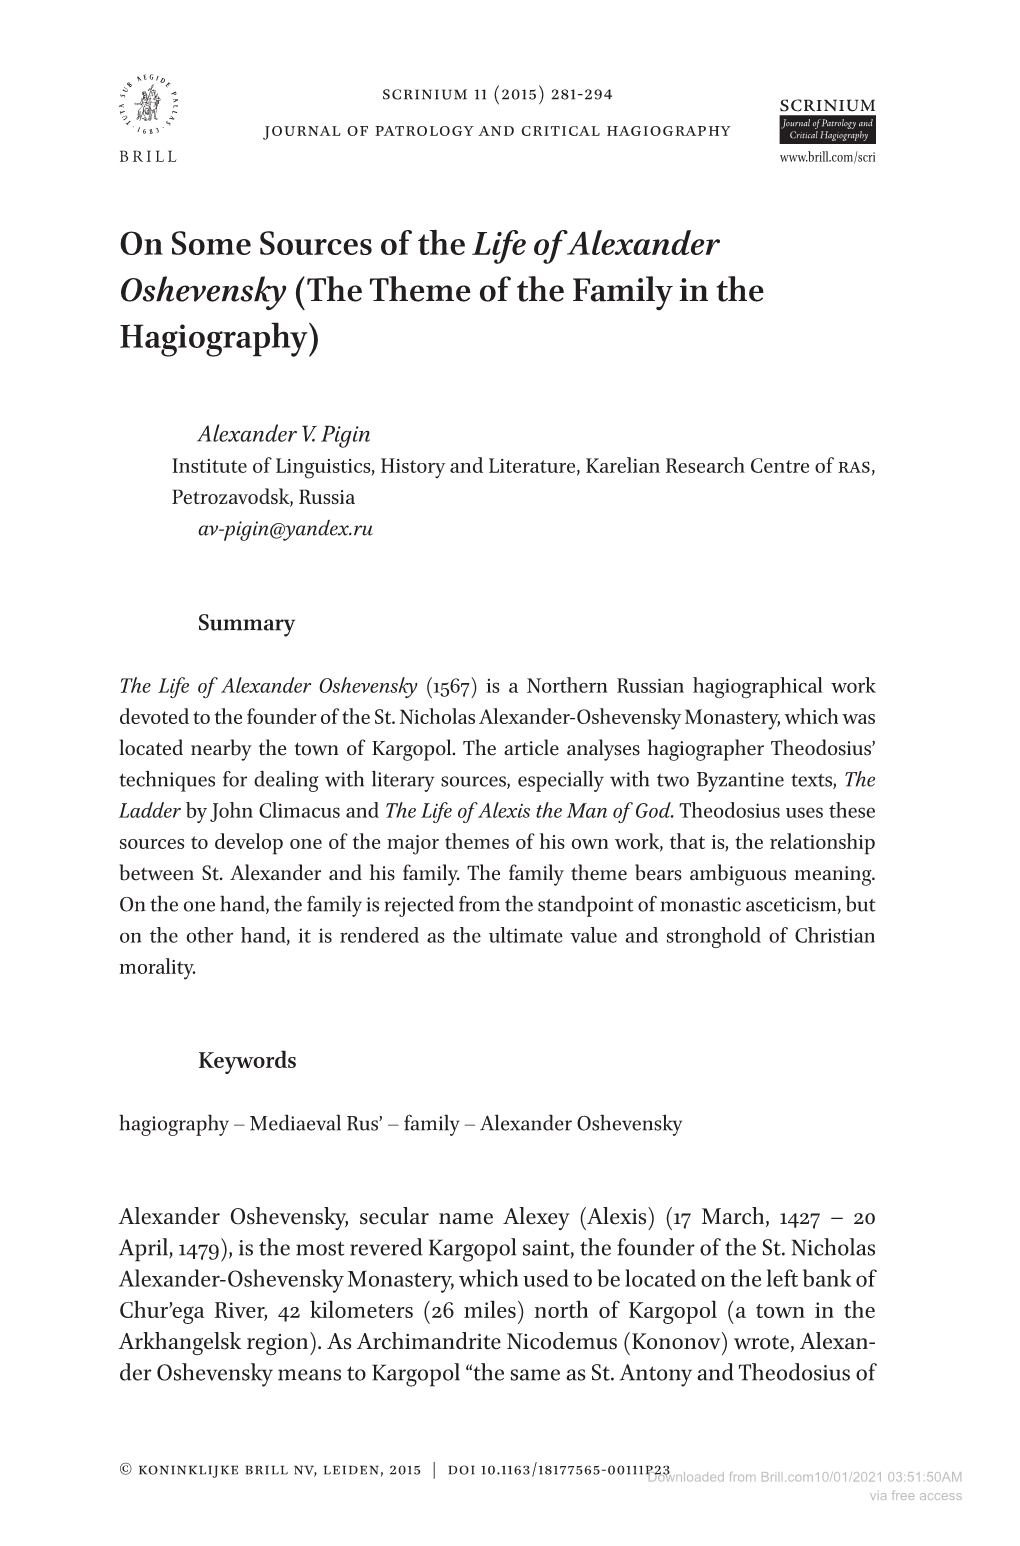 On Some Sources of the Life of Alexander Oshevensky (The Theme of the Family in the Hagiography)